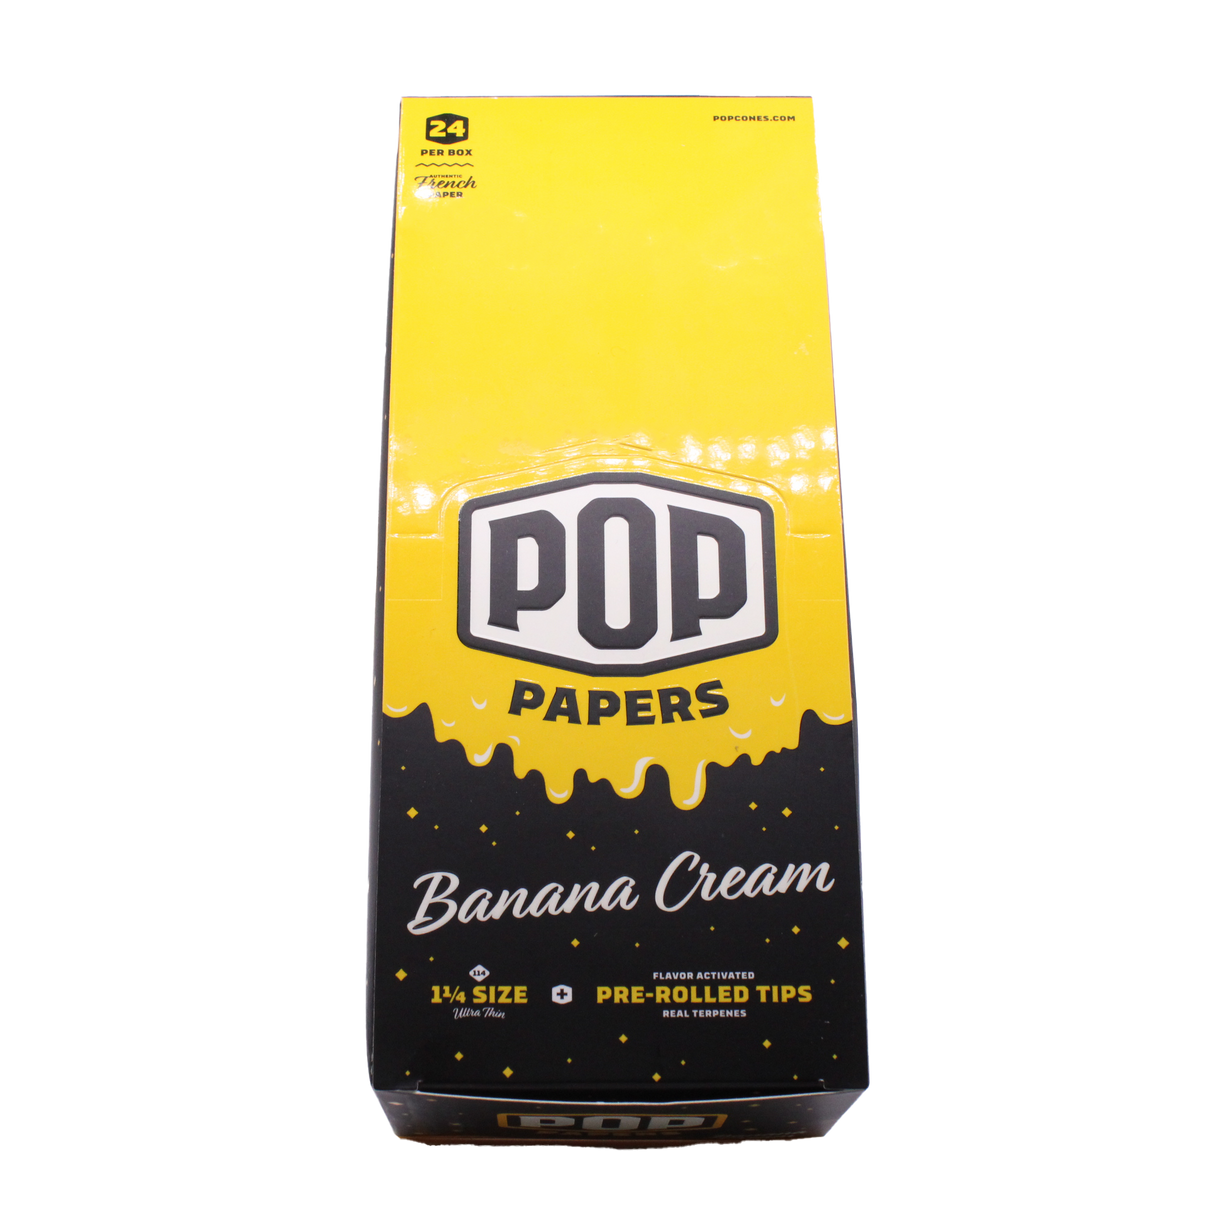 Pop Papers Rolling Papers and Tips - 1 1/4" Size